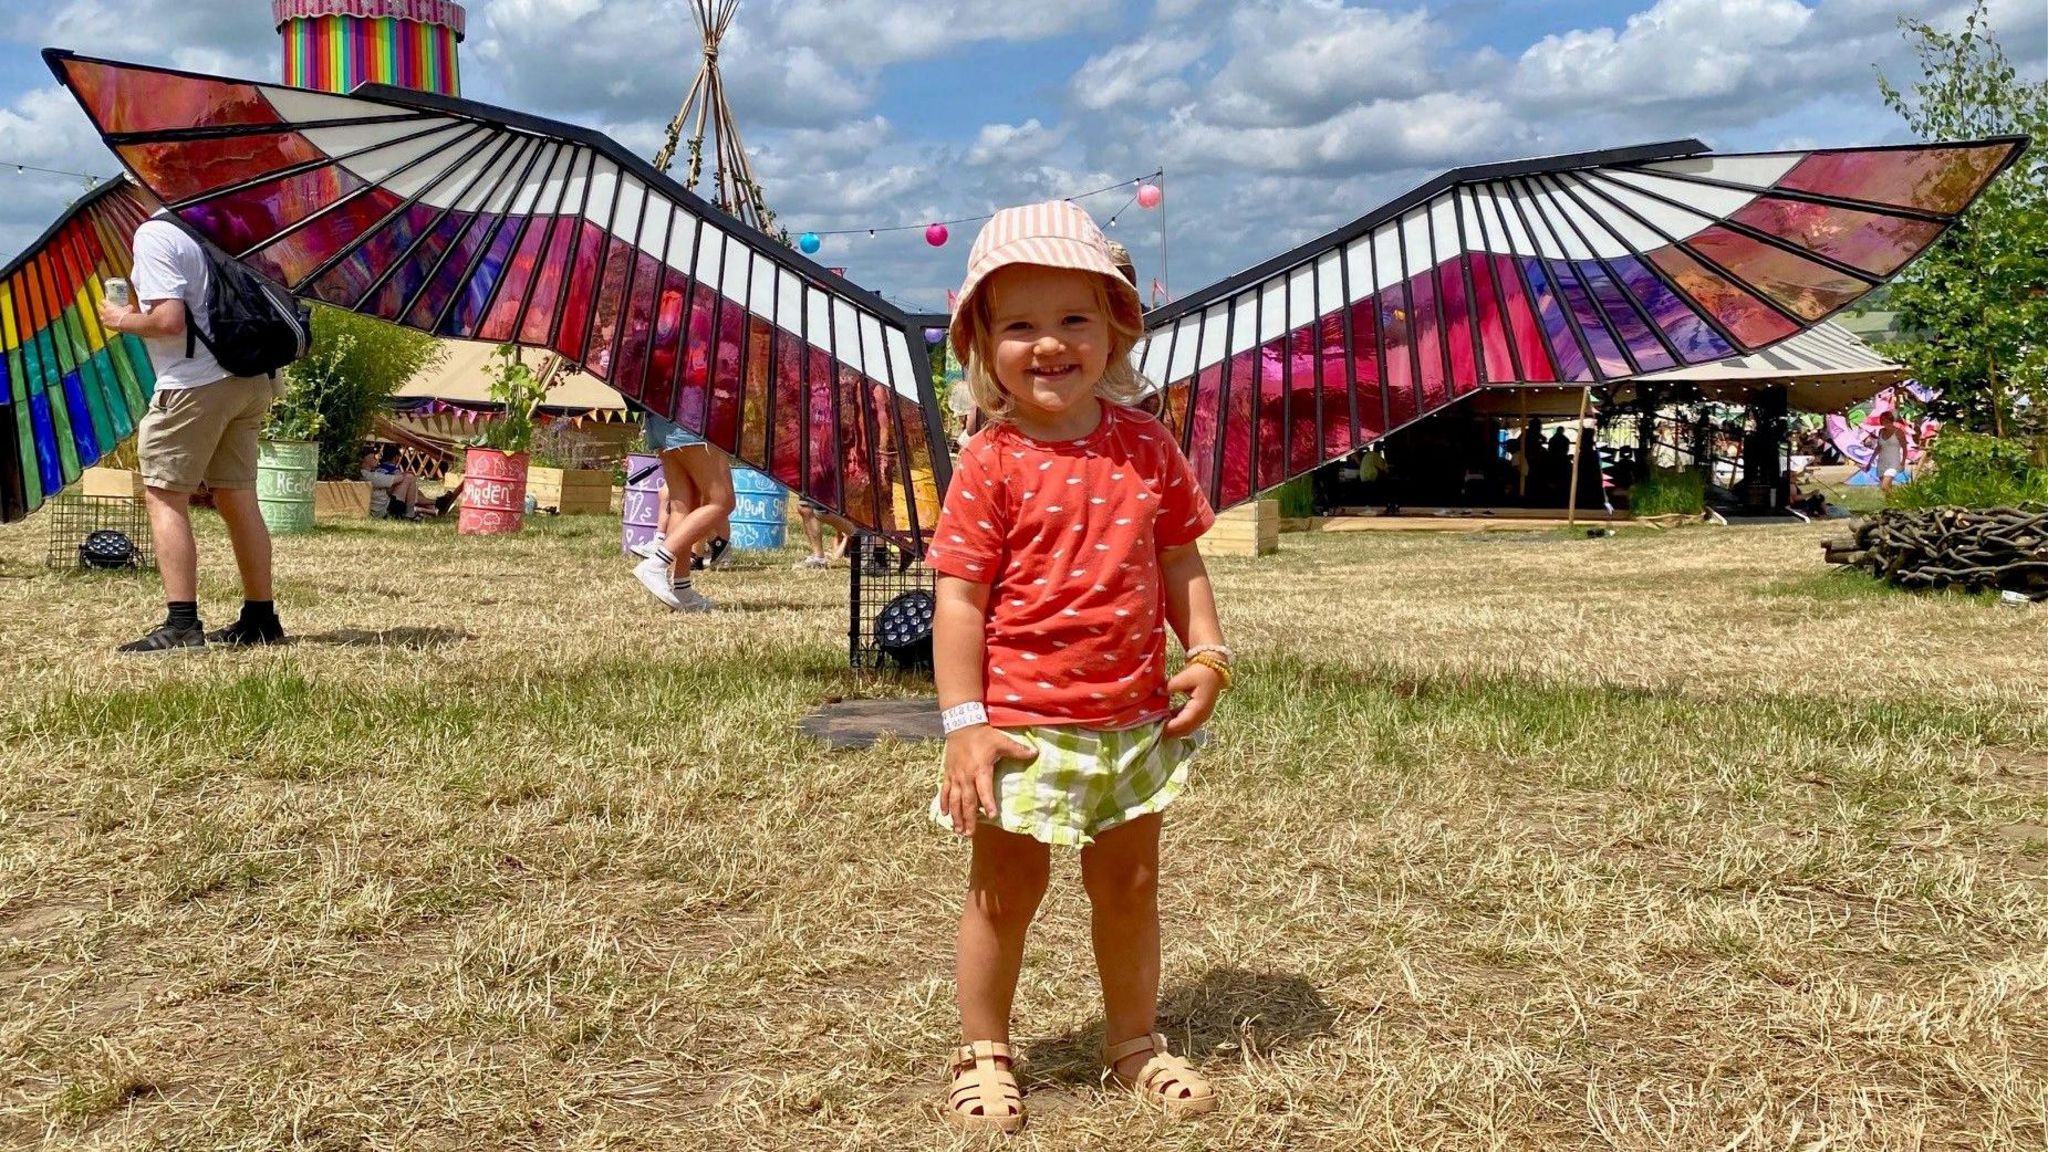 A little girl smiling and standing in front of the pink and purple stained glass wings at Glastonbury 